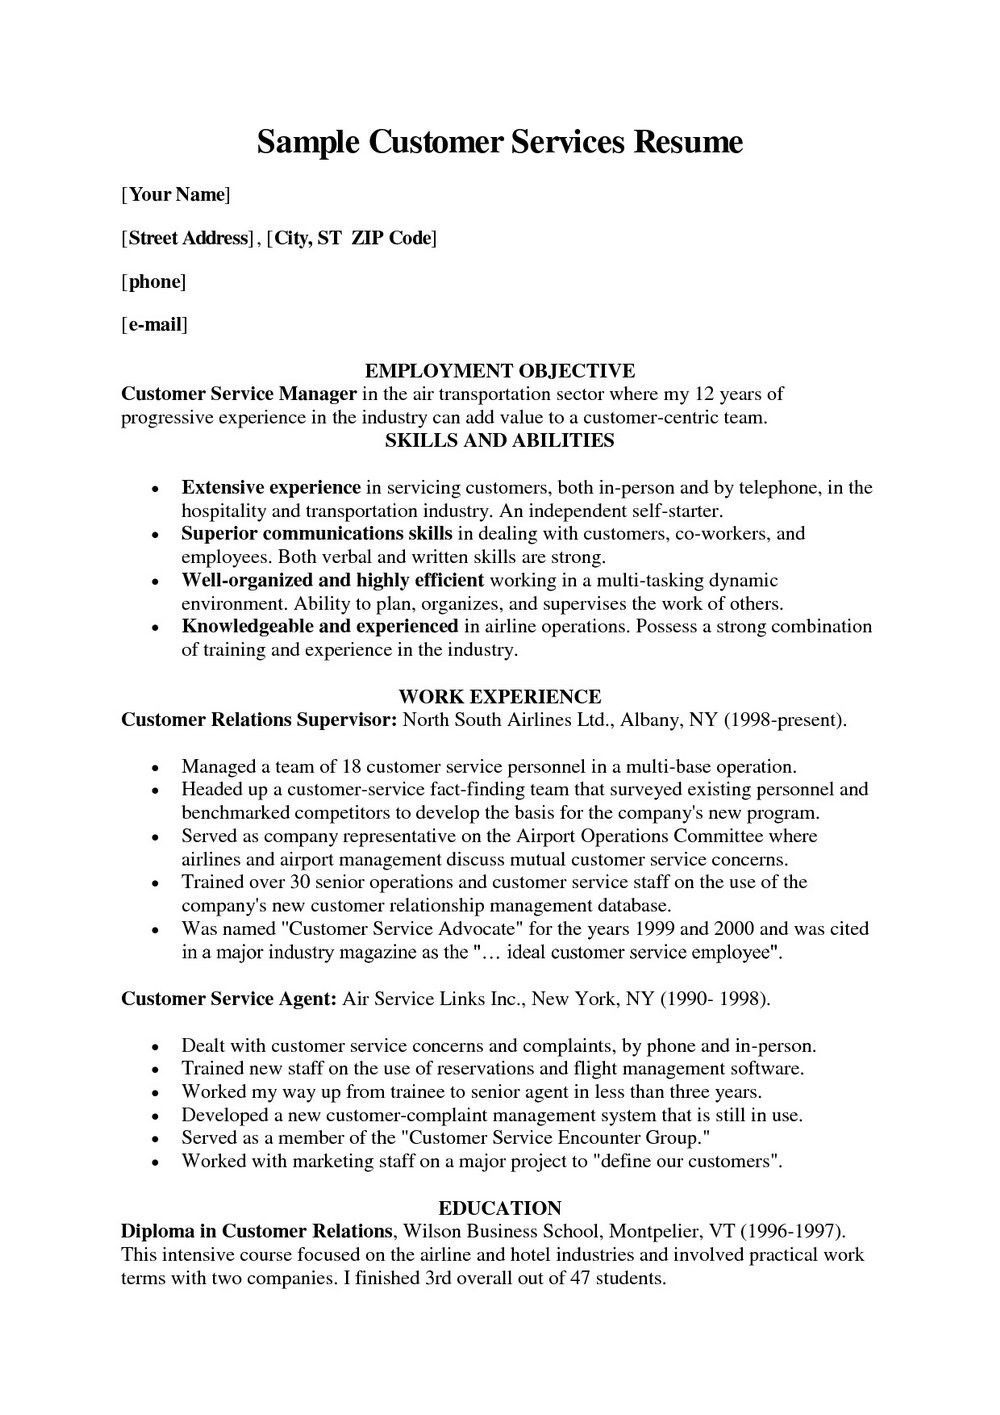 Sample Resume for Csr with No Experience Sample Resume for Customer Service Representative No